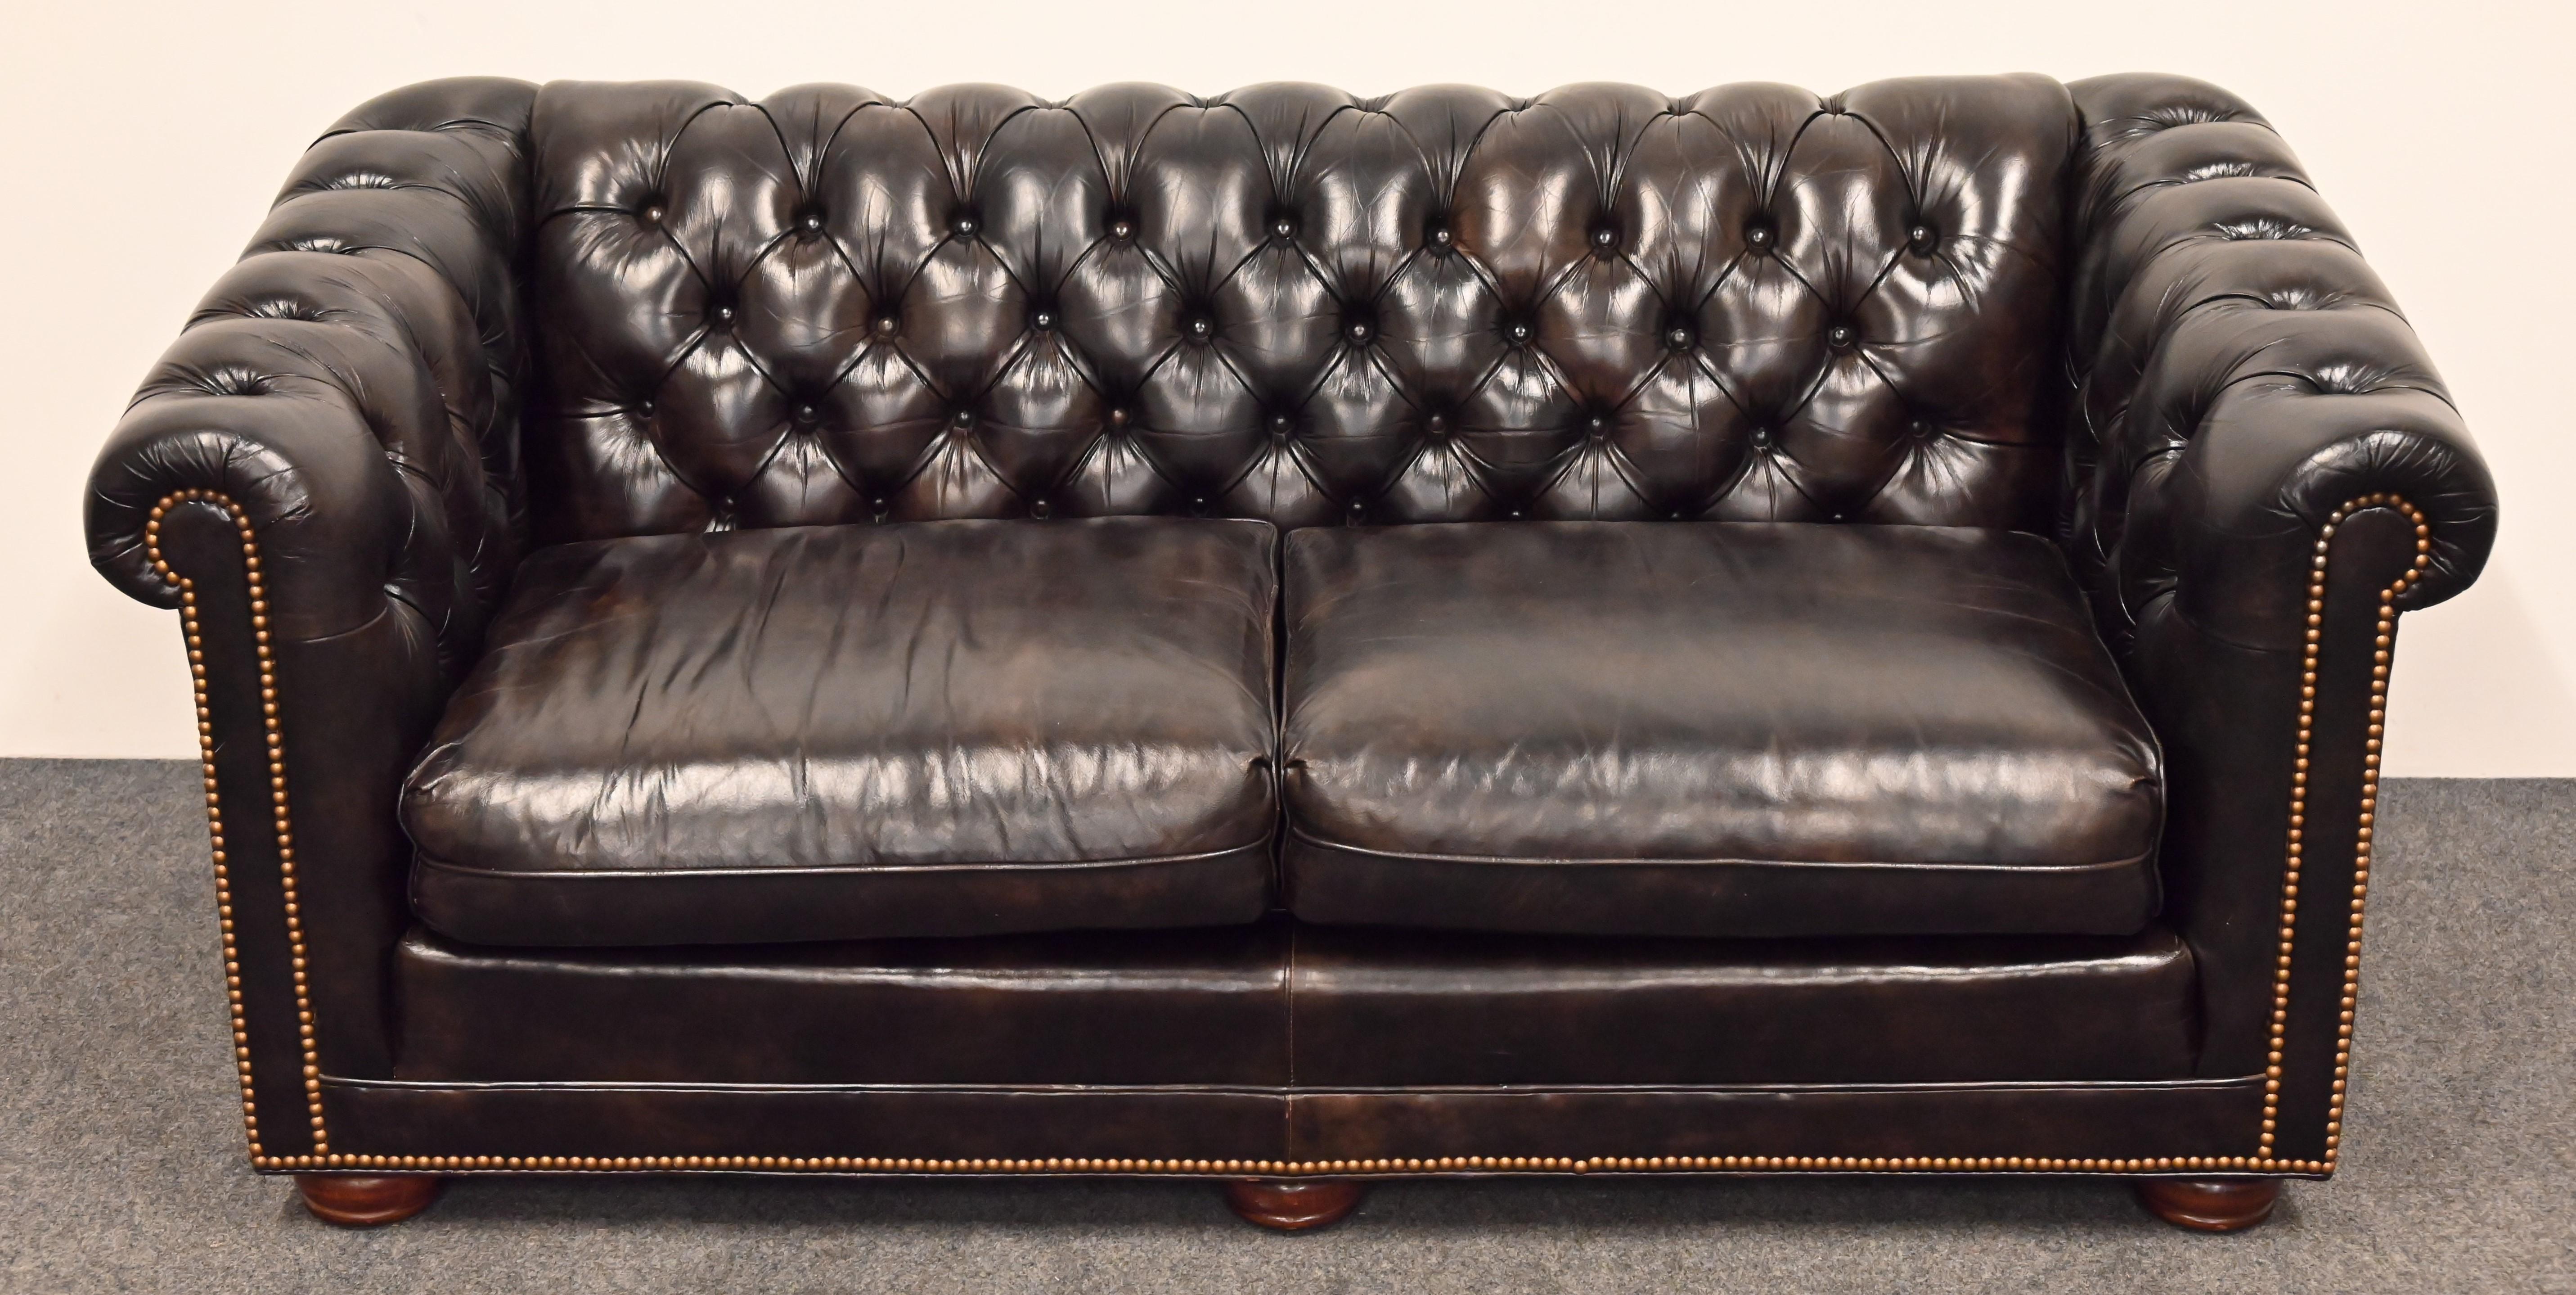 Mid-Century Modern Chesterfield Leather Sofa by Leathercraft, 1970s